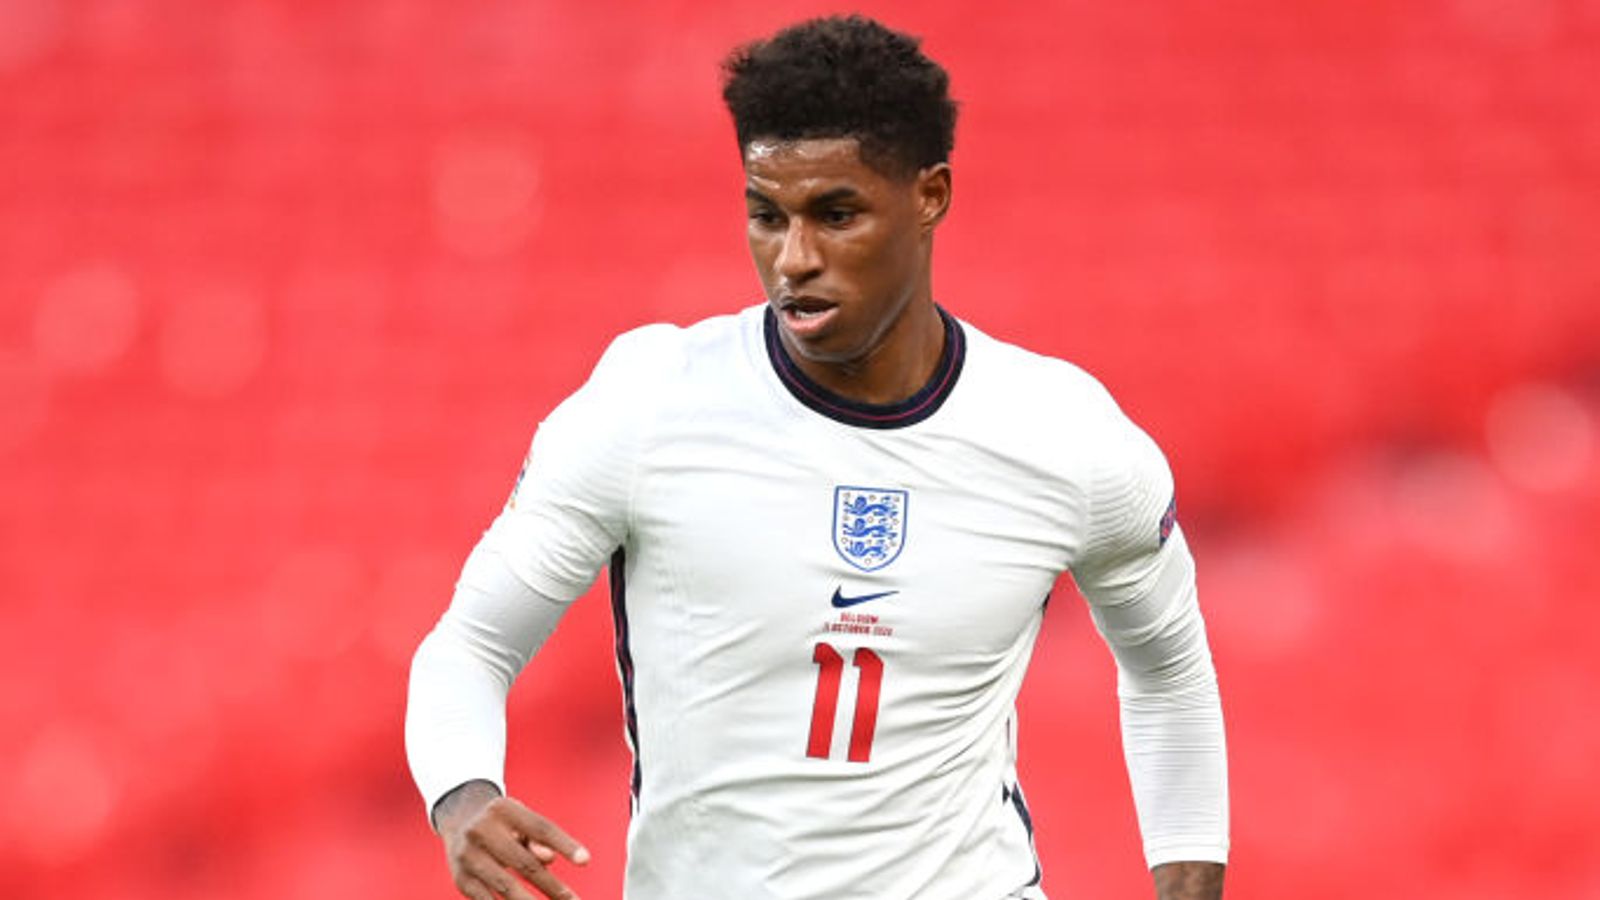 marcus-rashford-earns-place-on-football-black-list-in-honour-of-food-poverty-campaigning